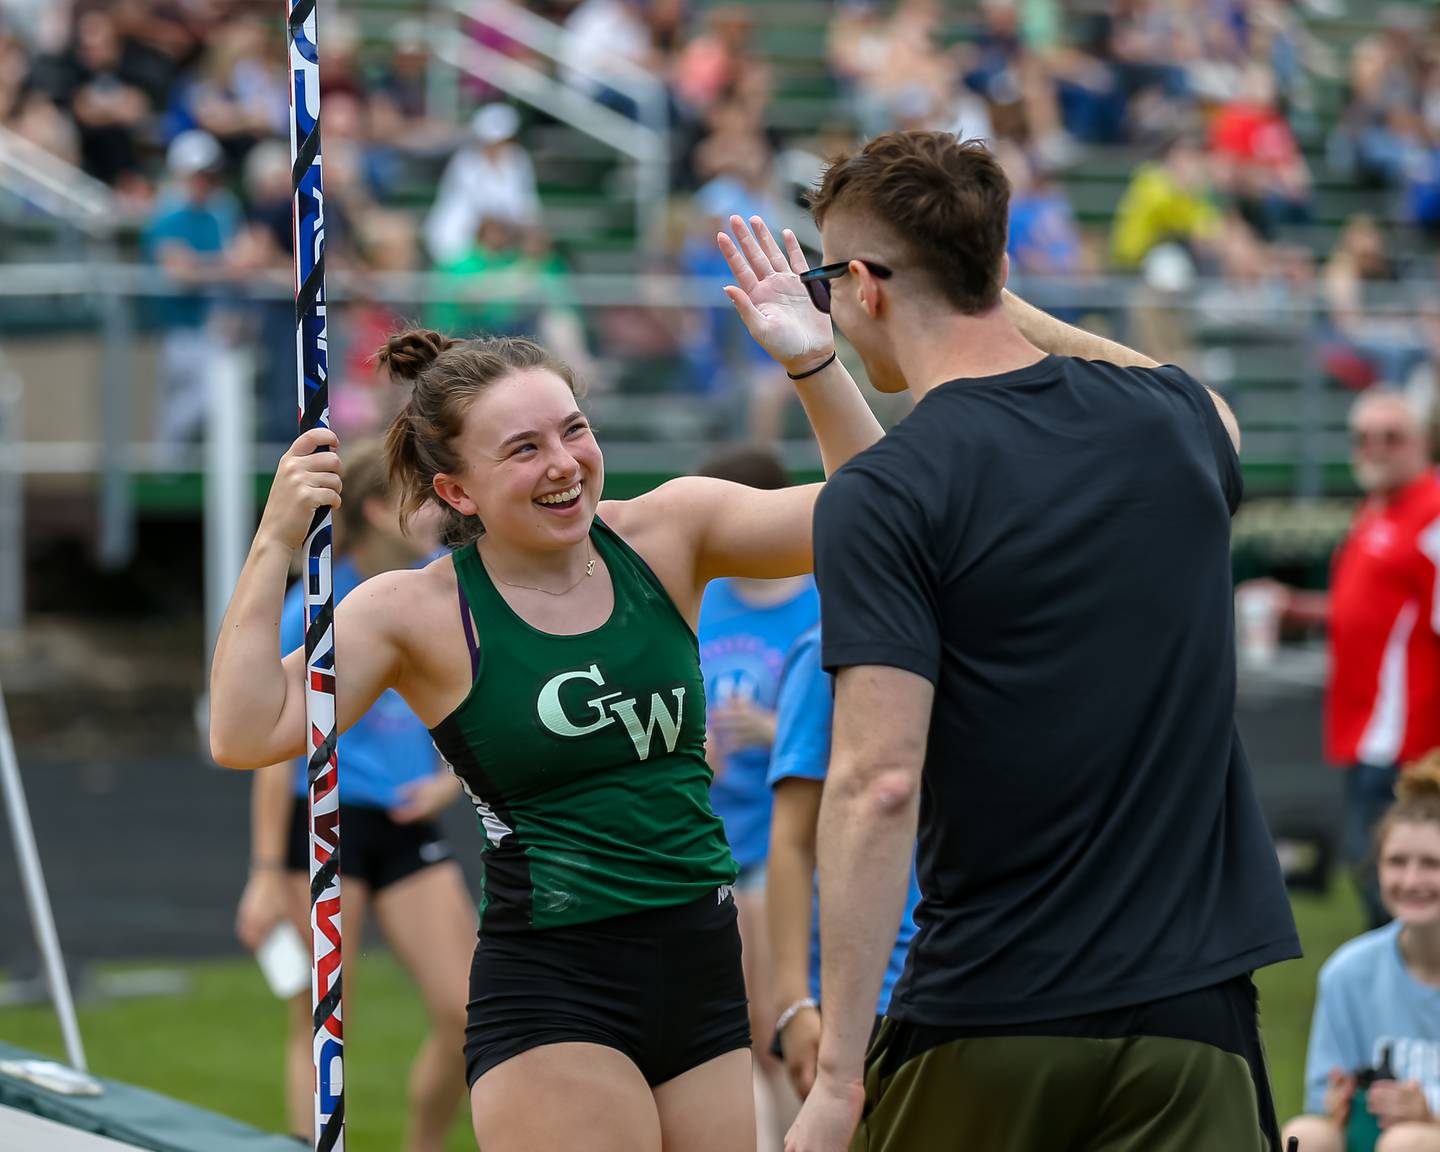 Glenbard West's Nina Wintermute is congratulated after making a successful vault at the Glenbard West's Sue Pariseau Girls Track and Field Invitational.  April 23.2022.